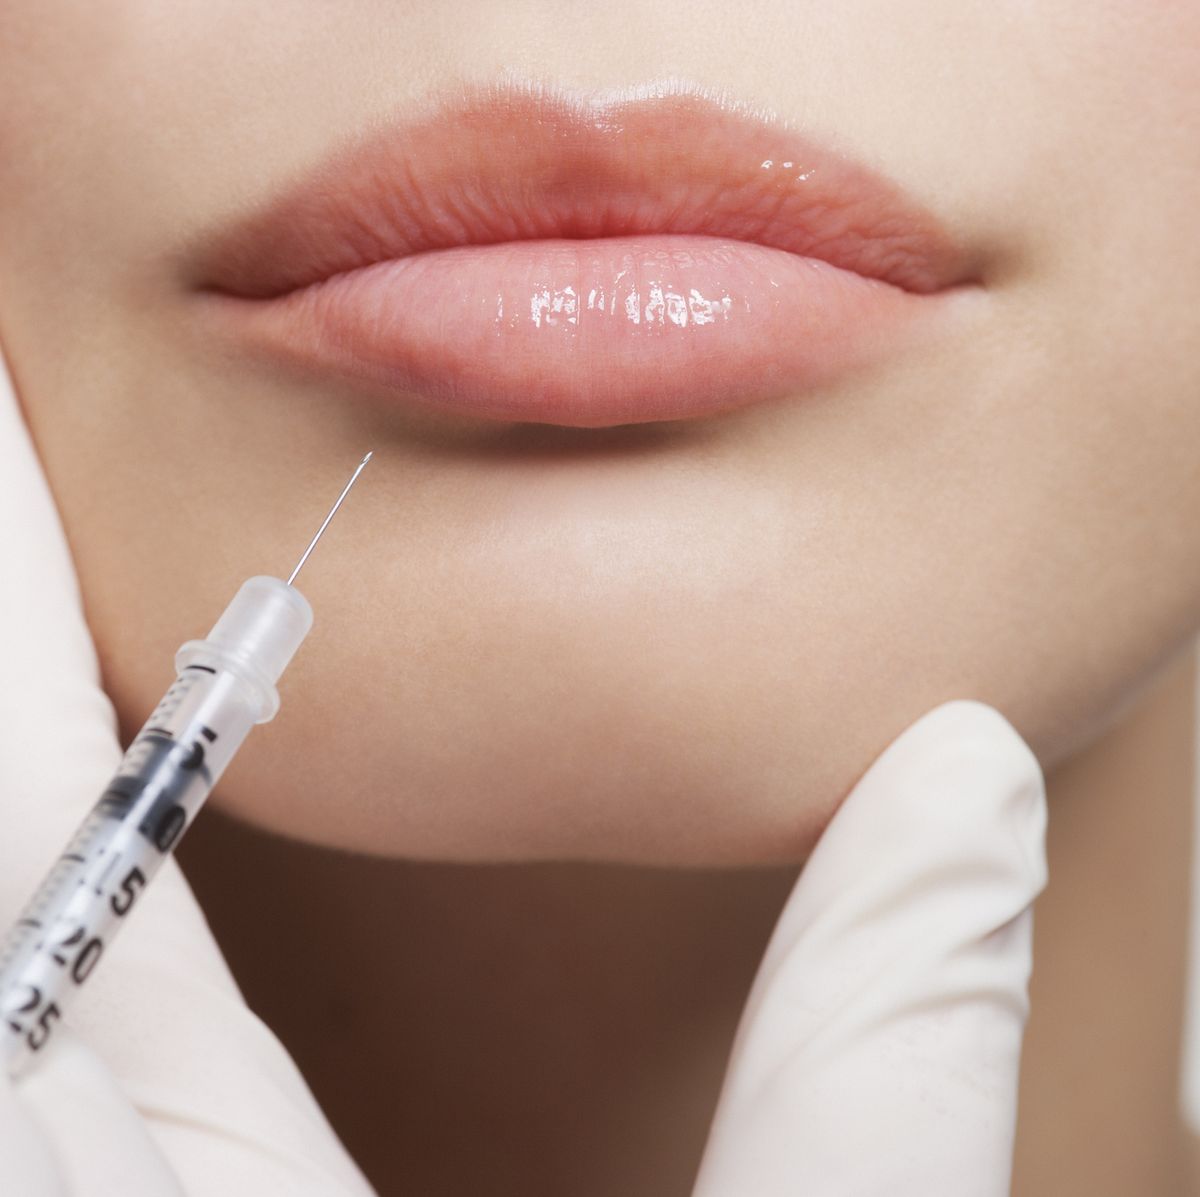 Cosmetic Injectables Sunshine Coast